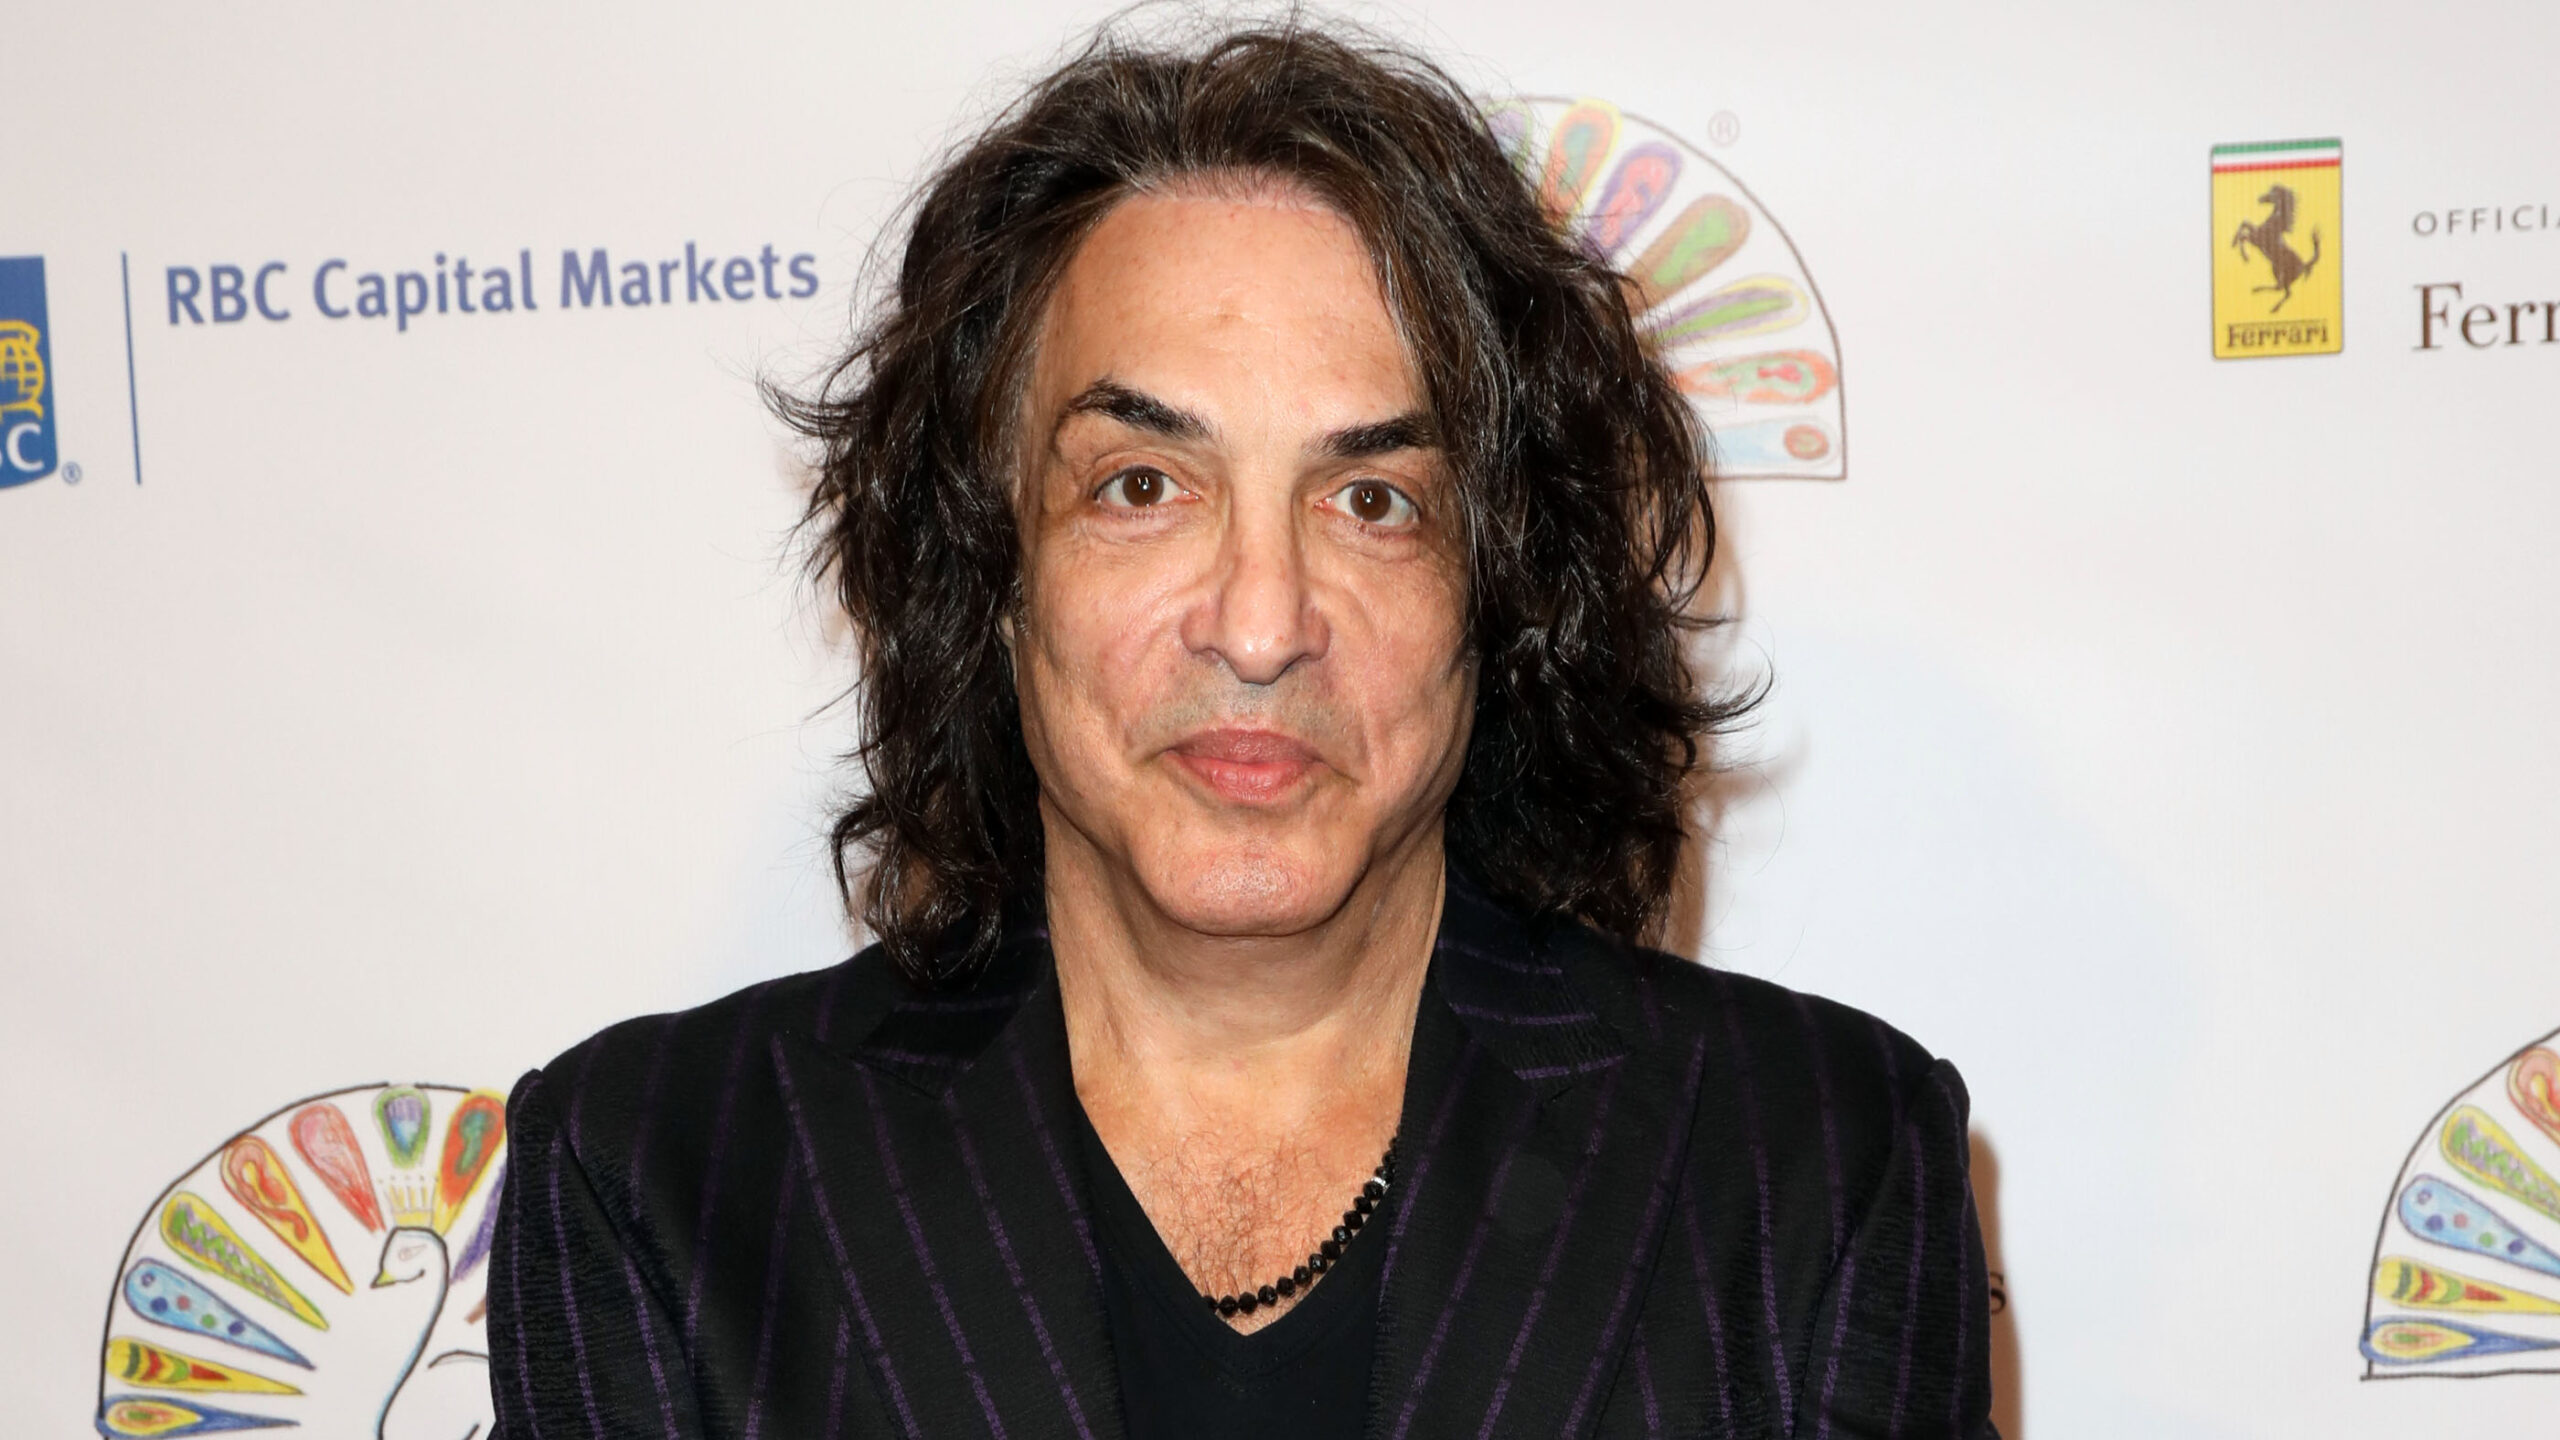 Paul Stanley of KISS changes stance on performing transgender surgeries on children.